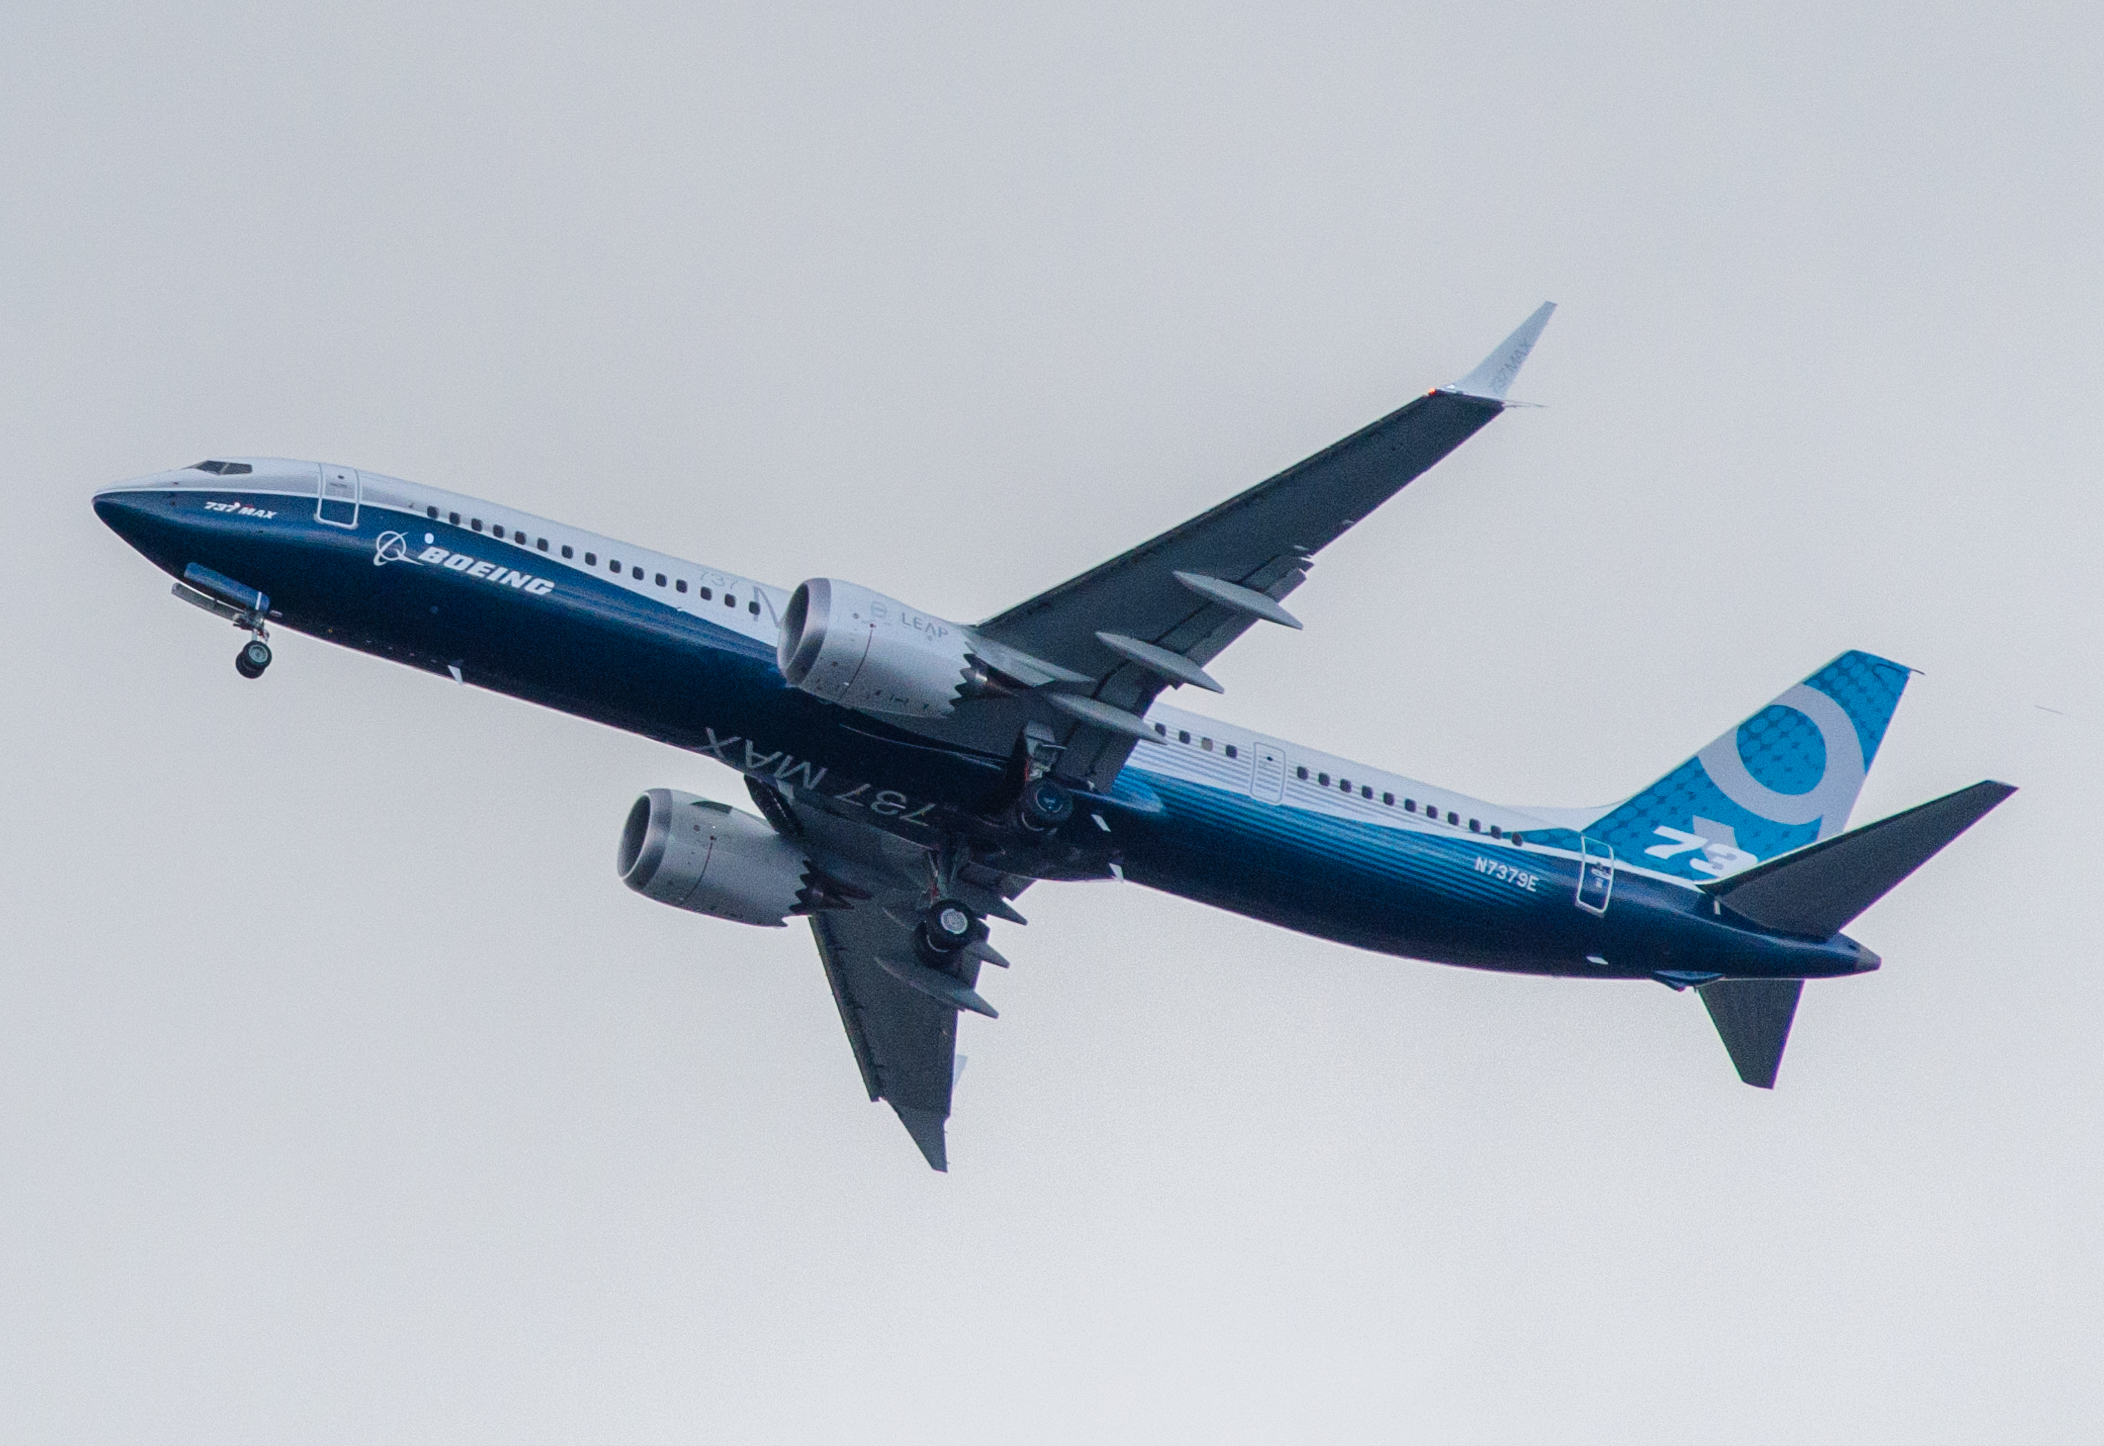 Boeing announces progress on 737 MAX safe return to service